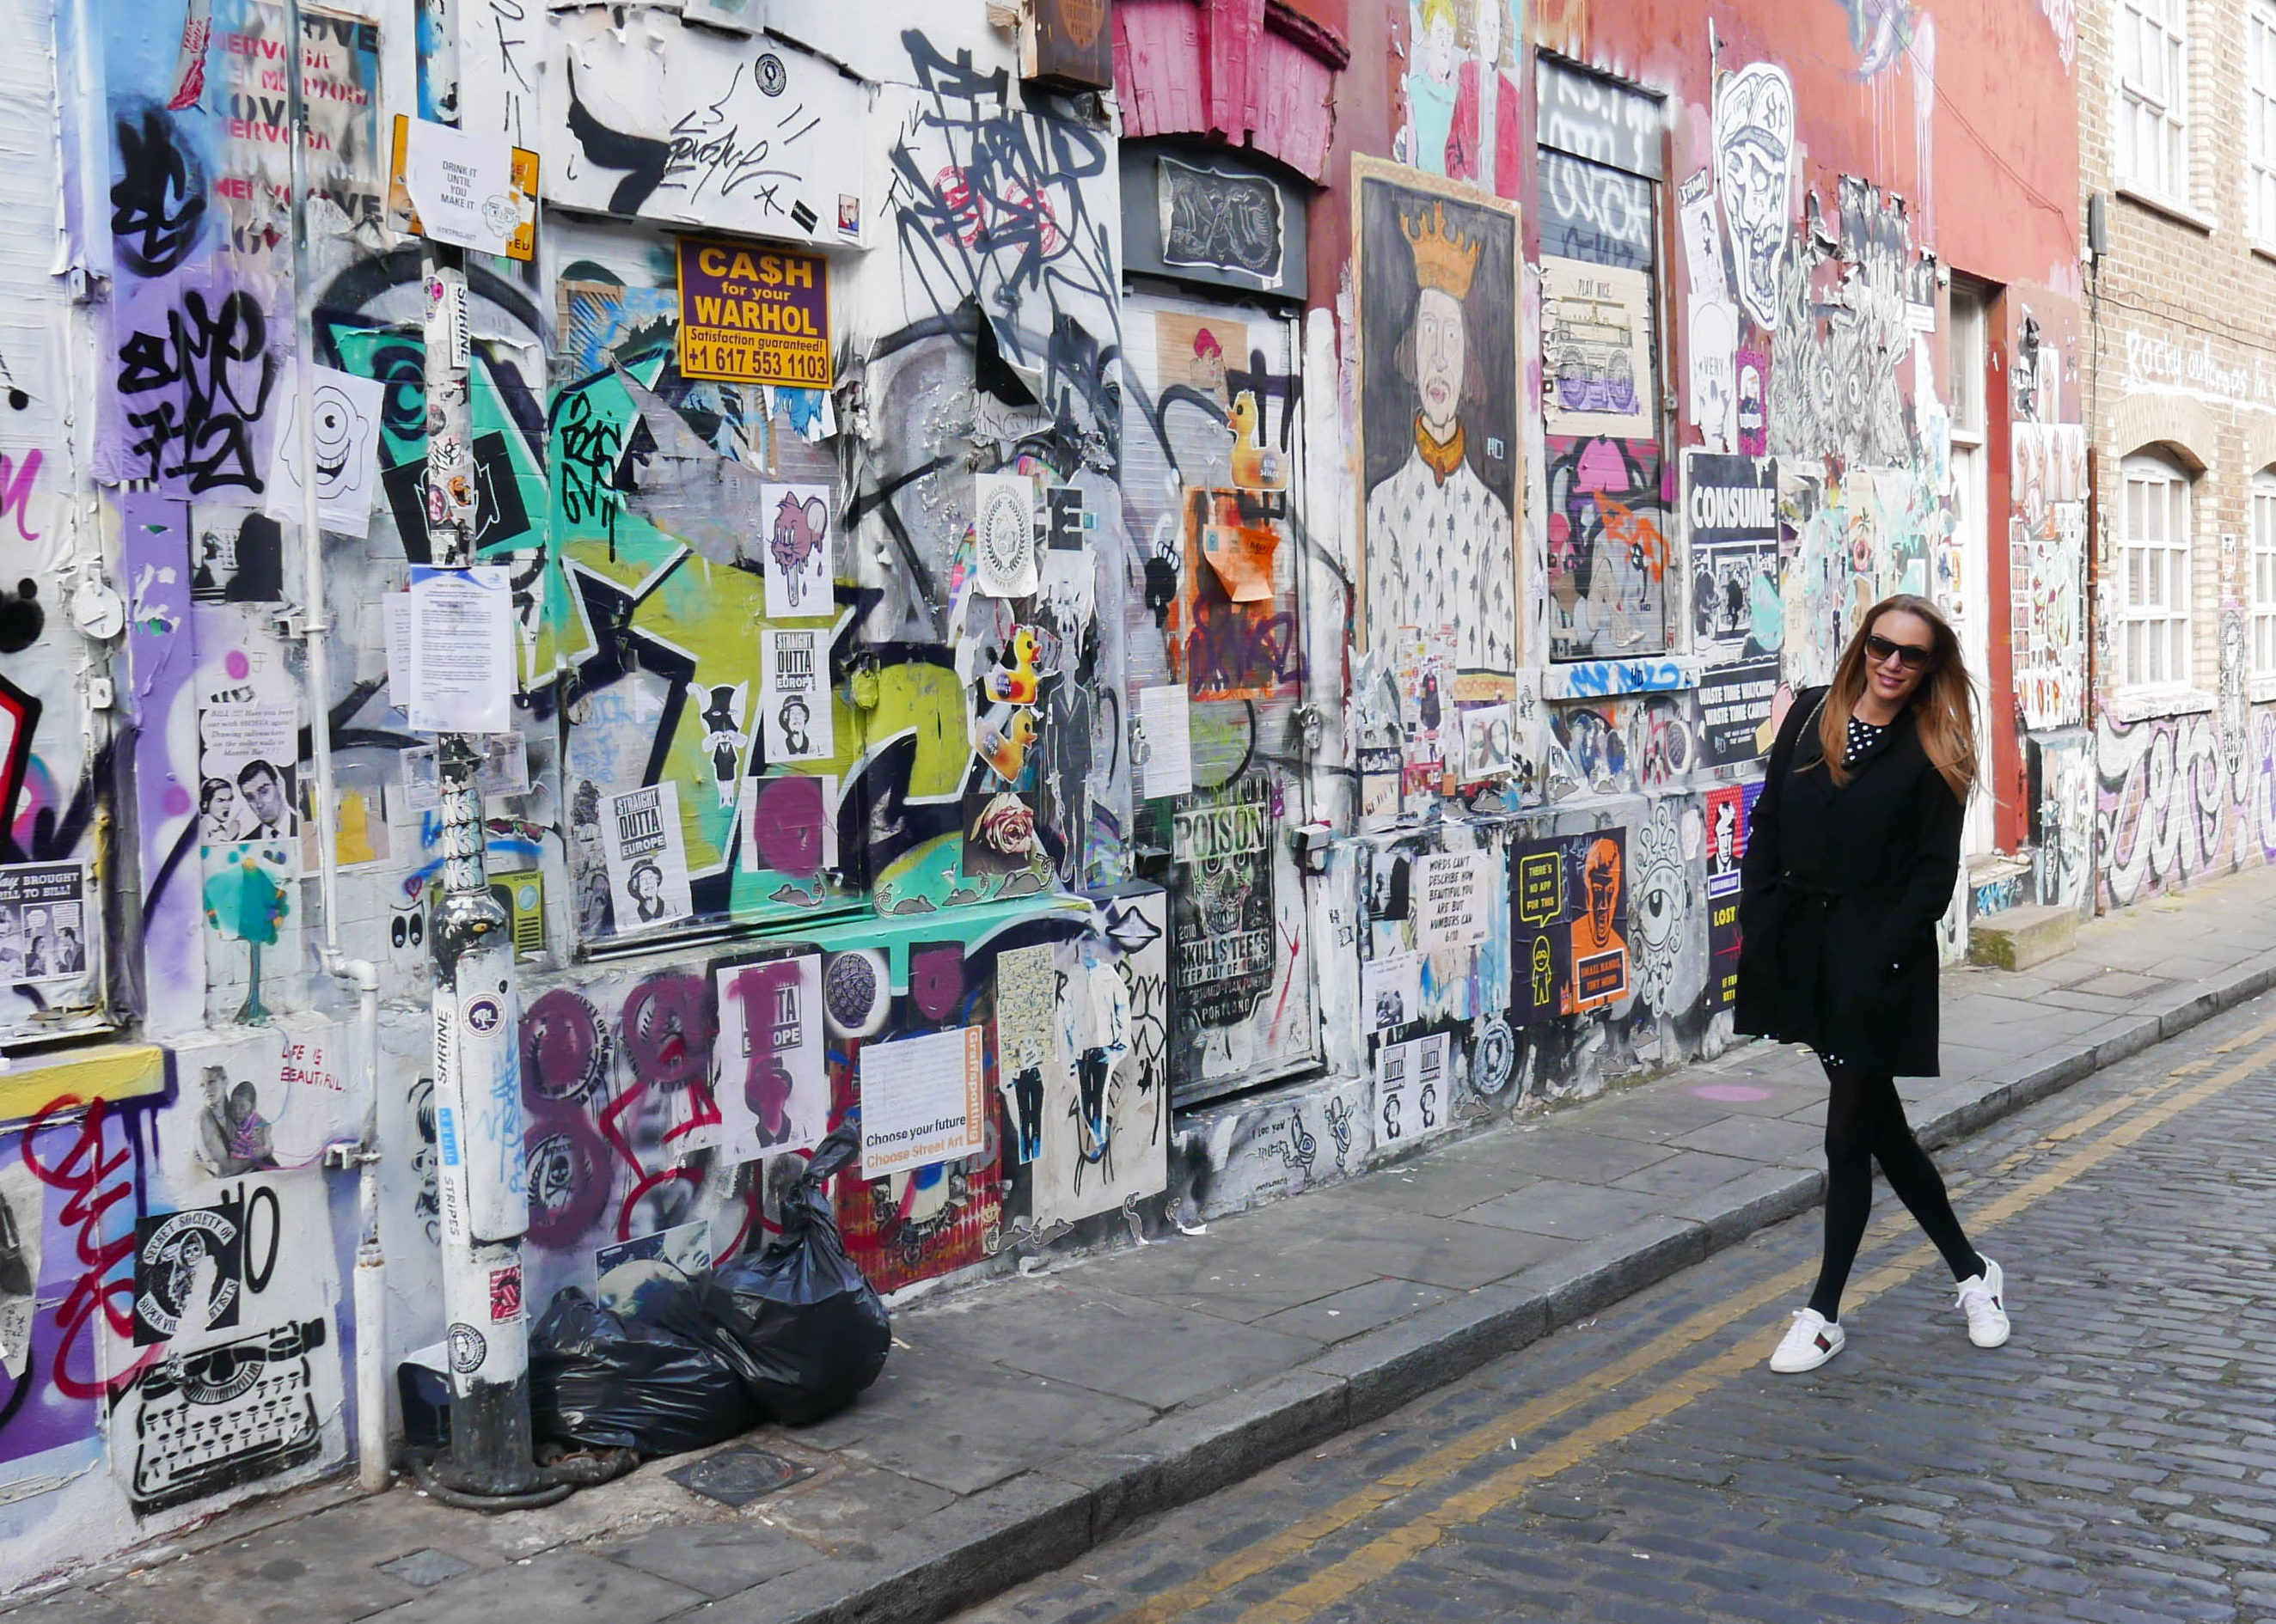 When West meets East – my amazing day trip to Shoreditch